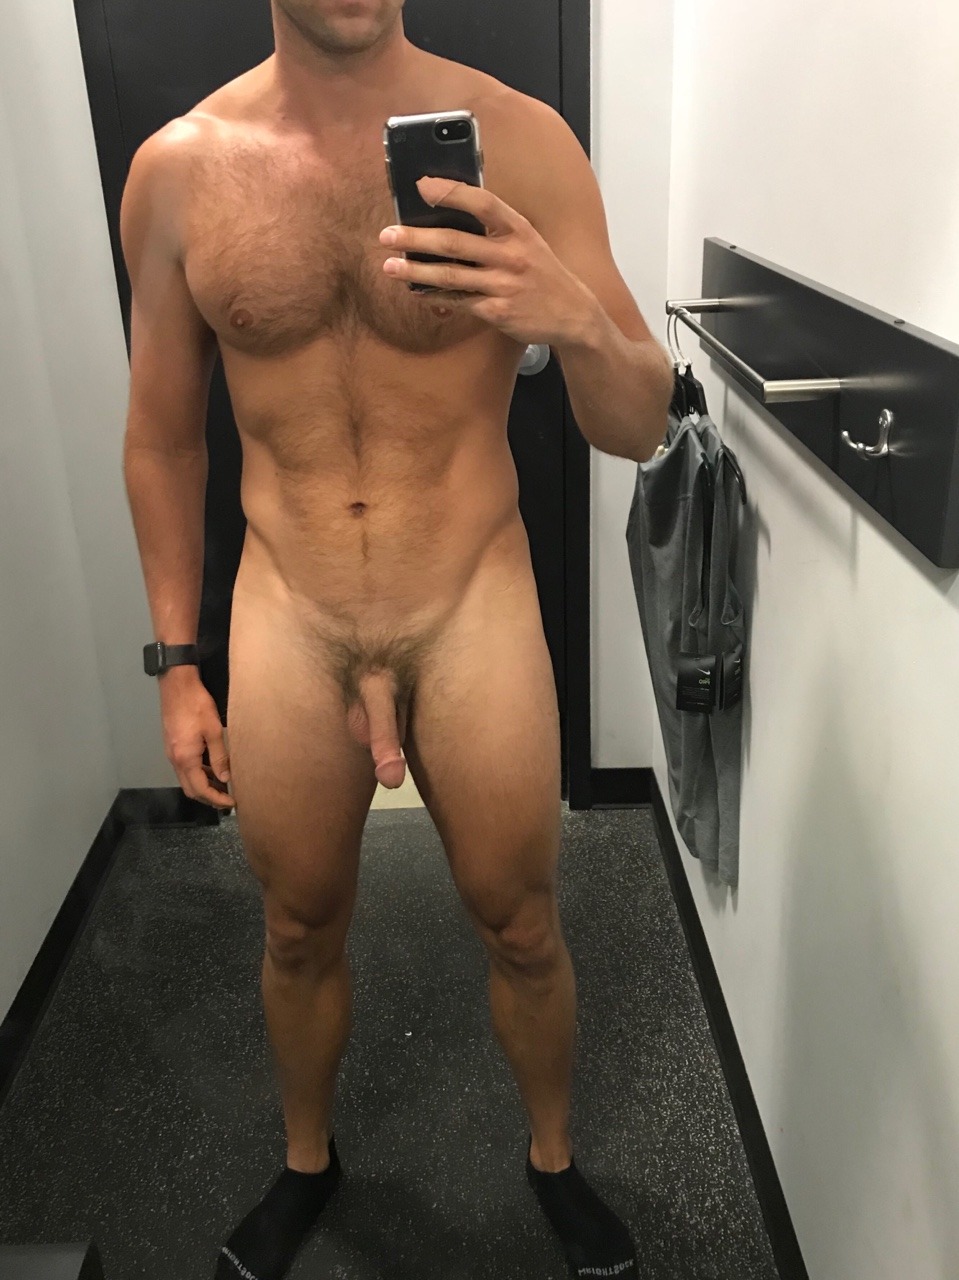 zoobypops:  Fitting room fun. Great to be nude and hear clothed people outside the